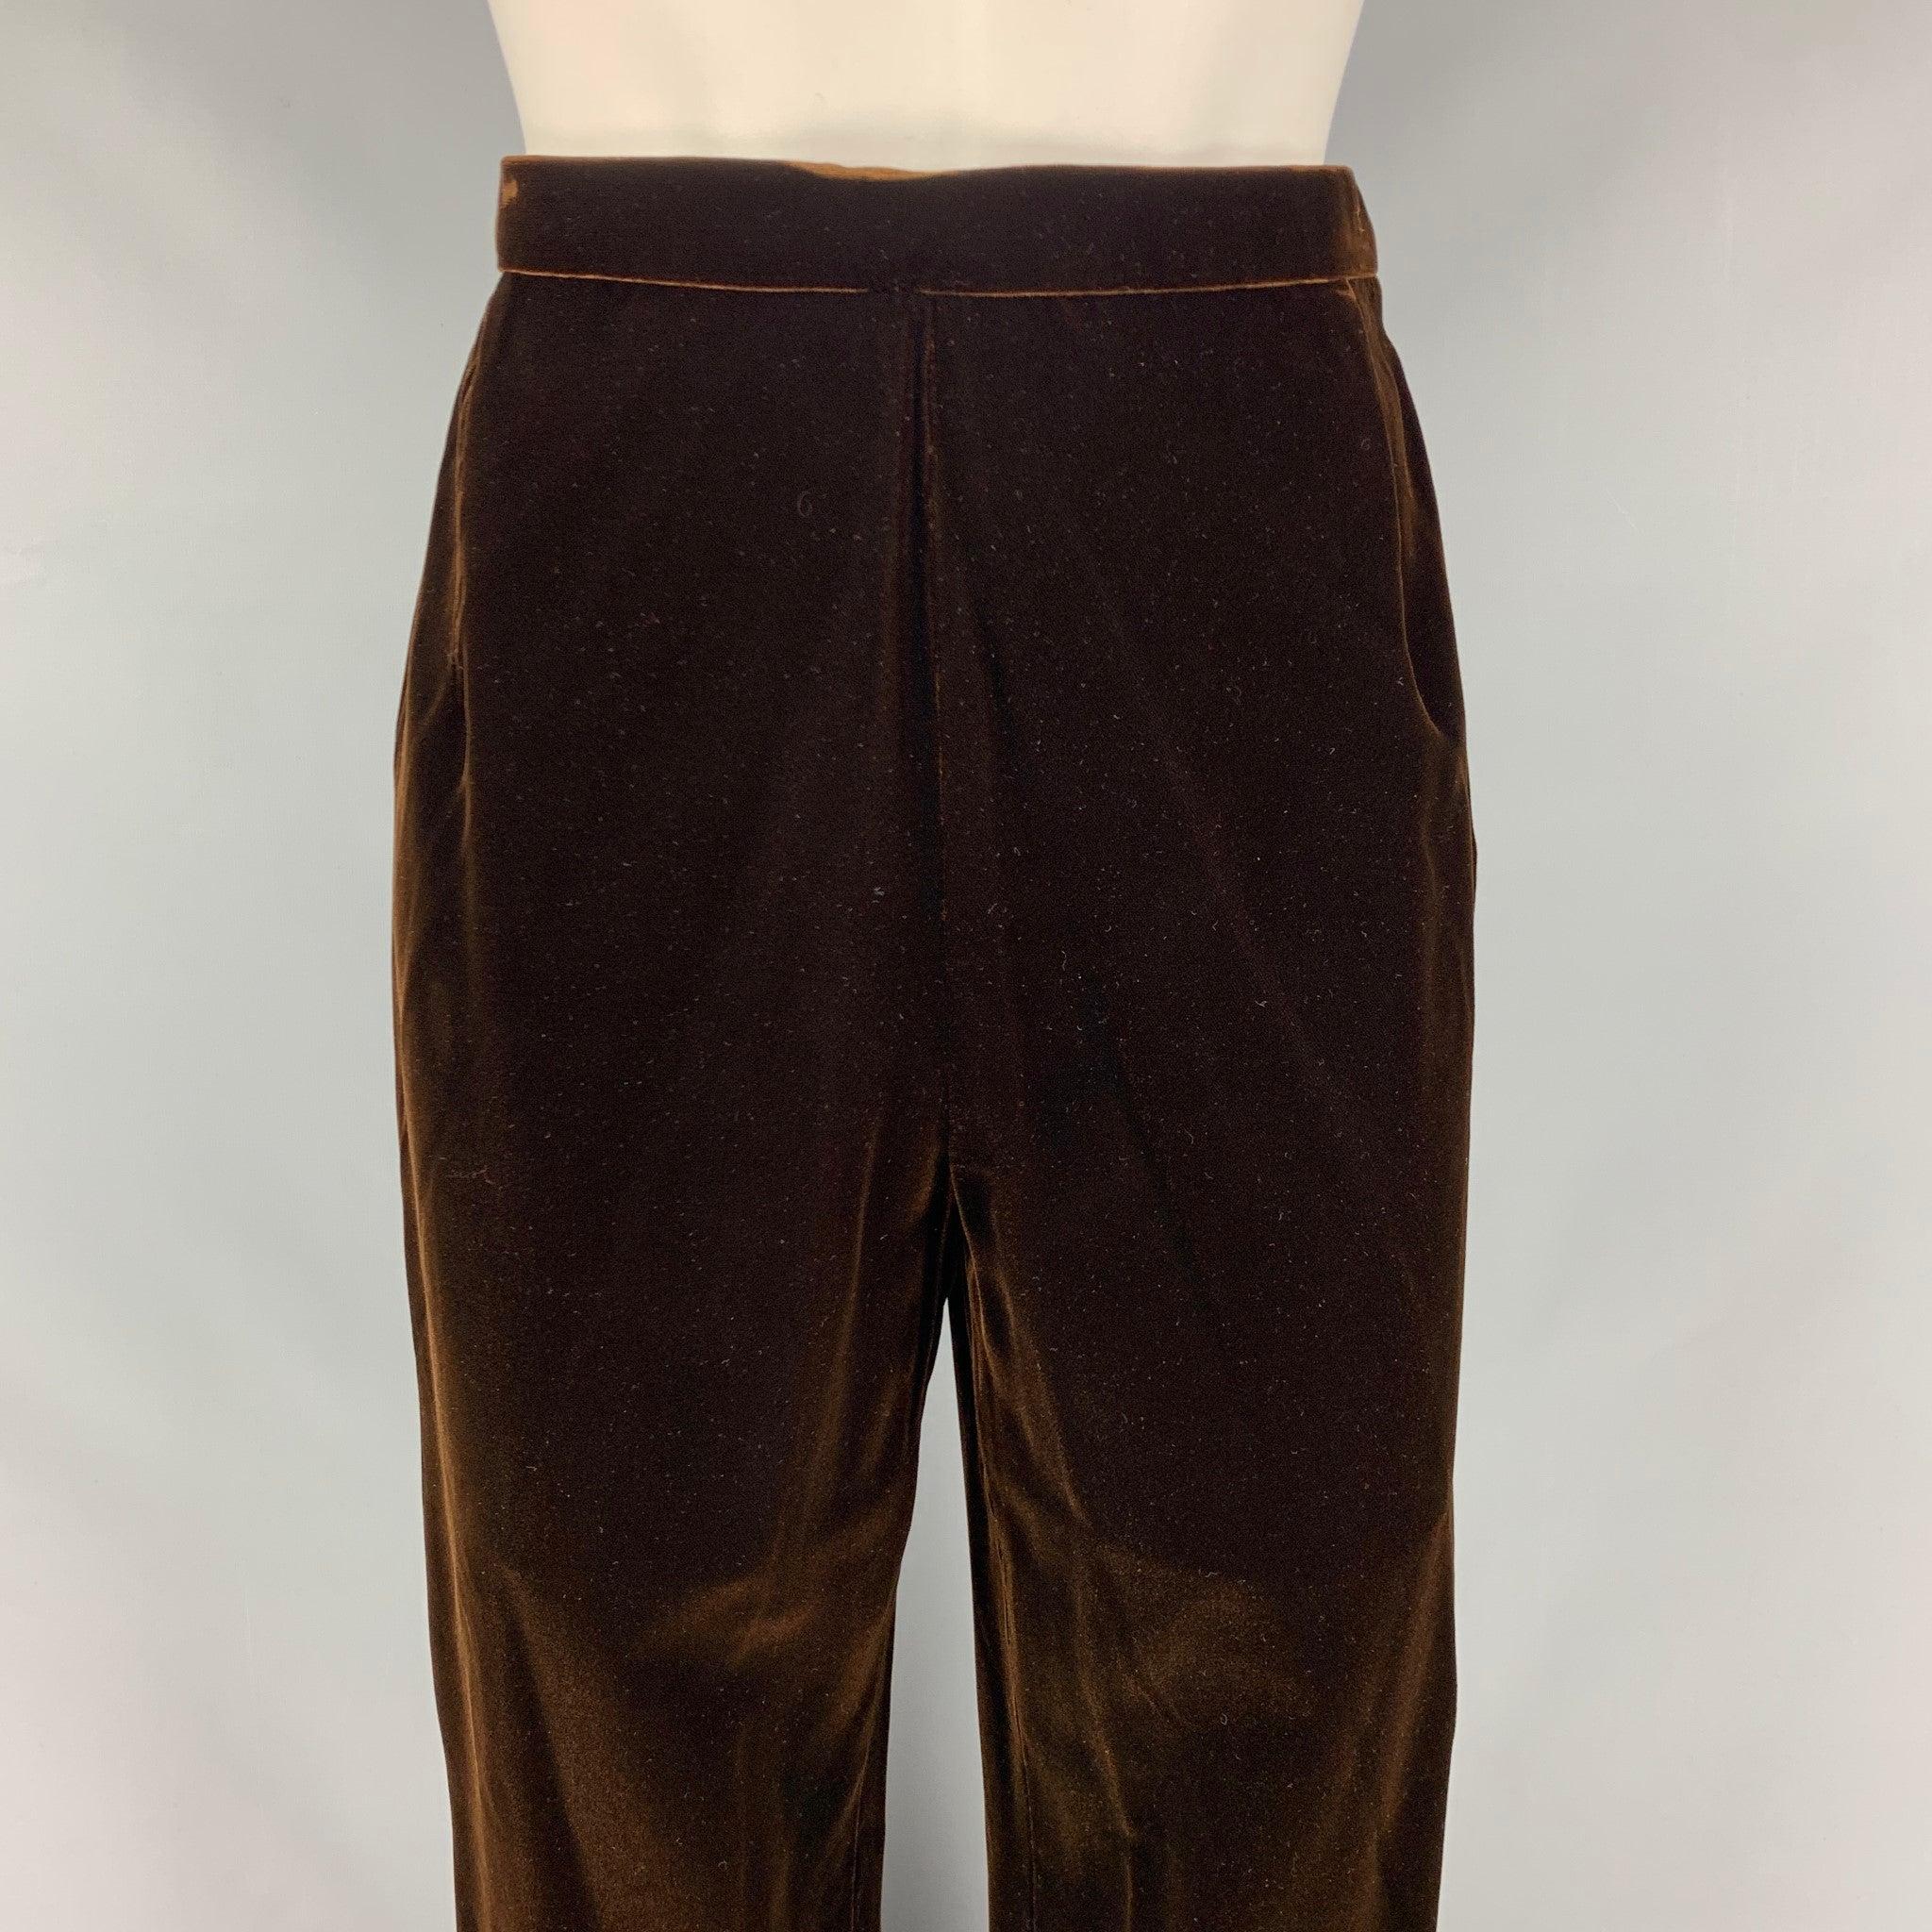 OSCAR DE LA RENTA dress pants comes in a brown velvet material featuring a wide leg style and a side zipper closure. Made in USA.Excellent Pre- Owned Condition. 

Marked:  8 

Measurements: 
 Waist: 28 inches Rise: 12 inches Inseam: 31 inches 
 
